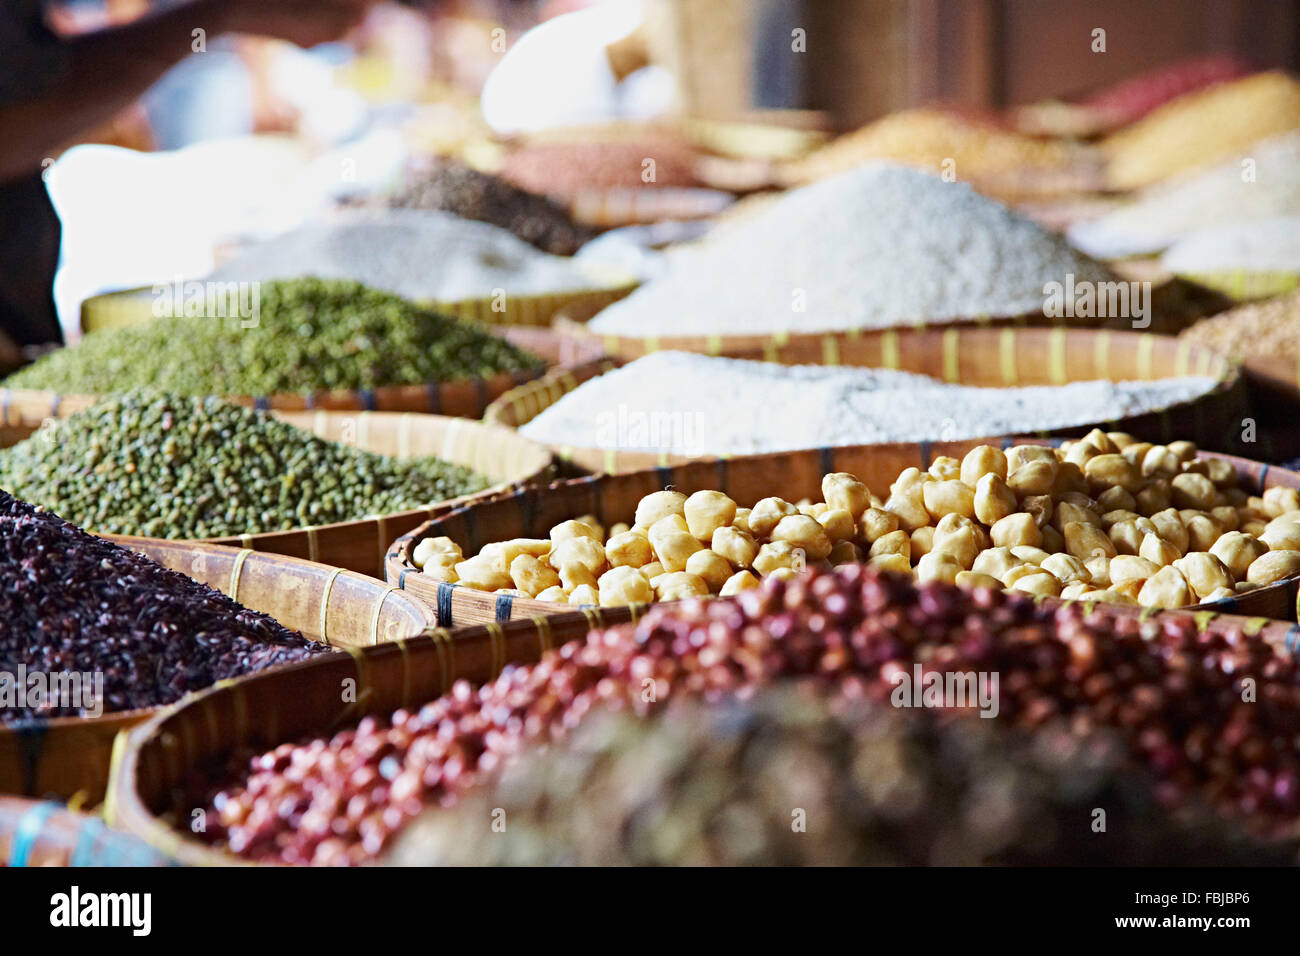 Market, baskets full of food, travel, beans, spices, chickpeas, Lombok, Indonesia, Asia Stock Photo